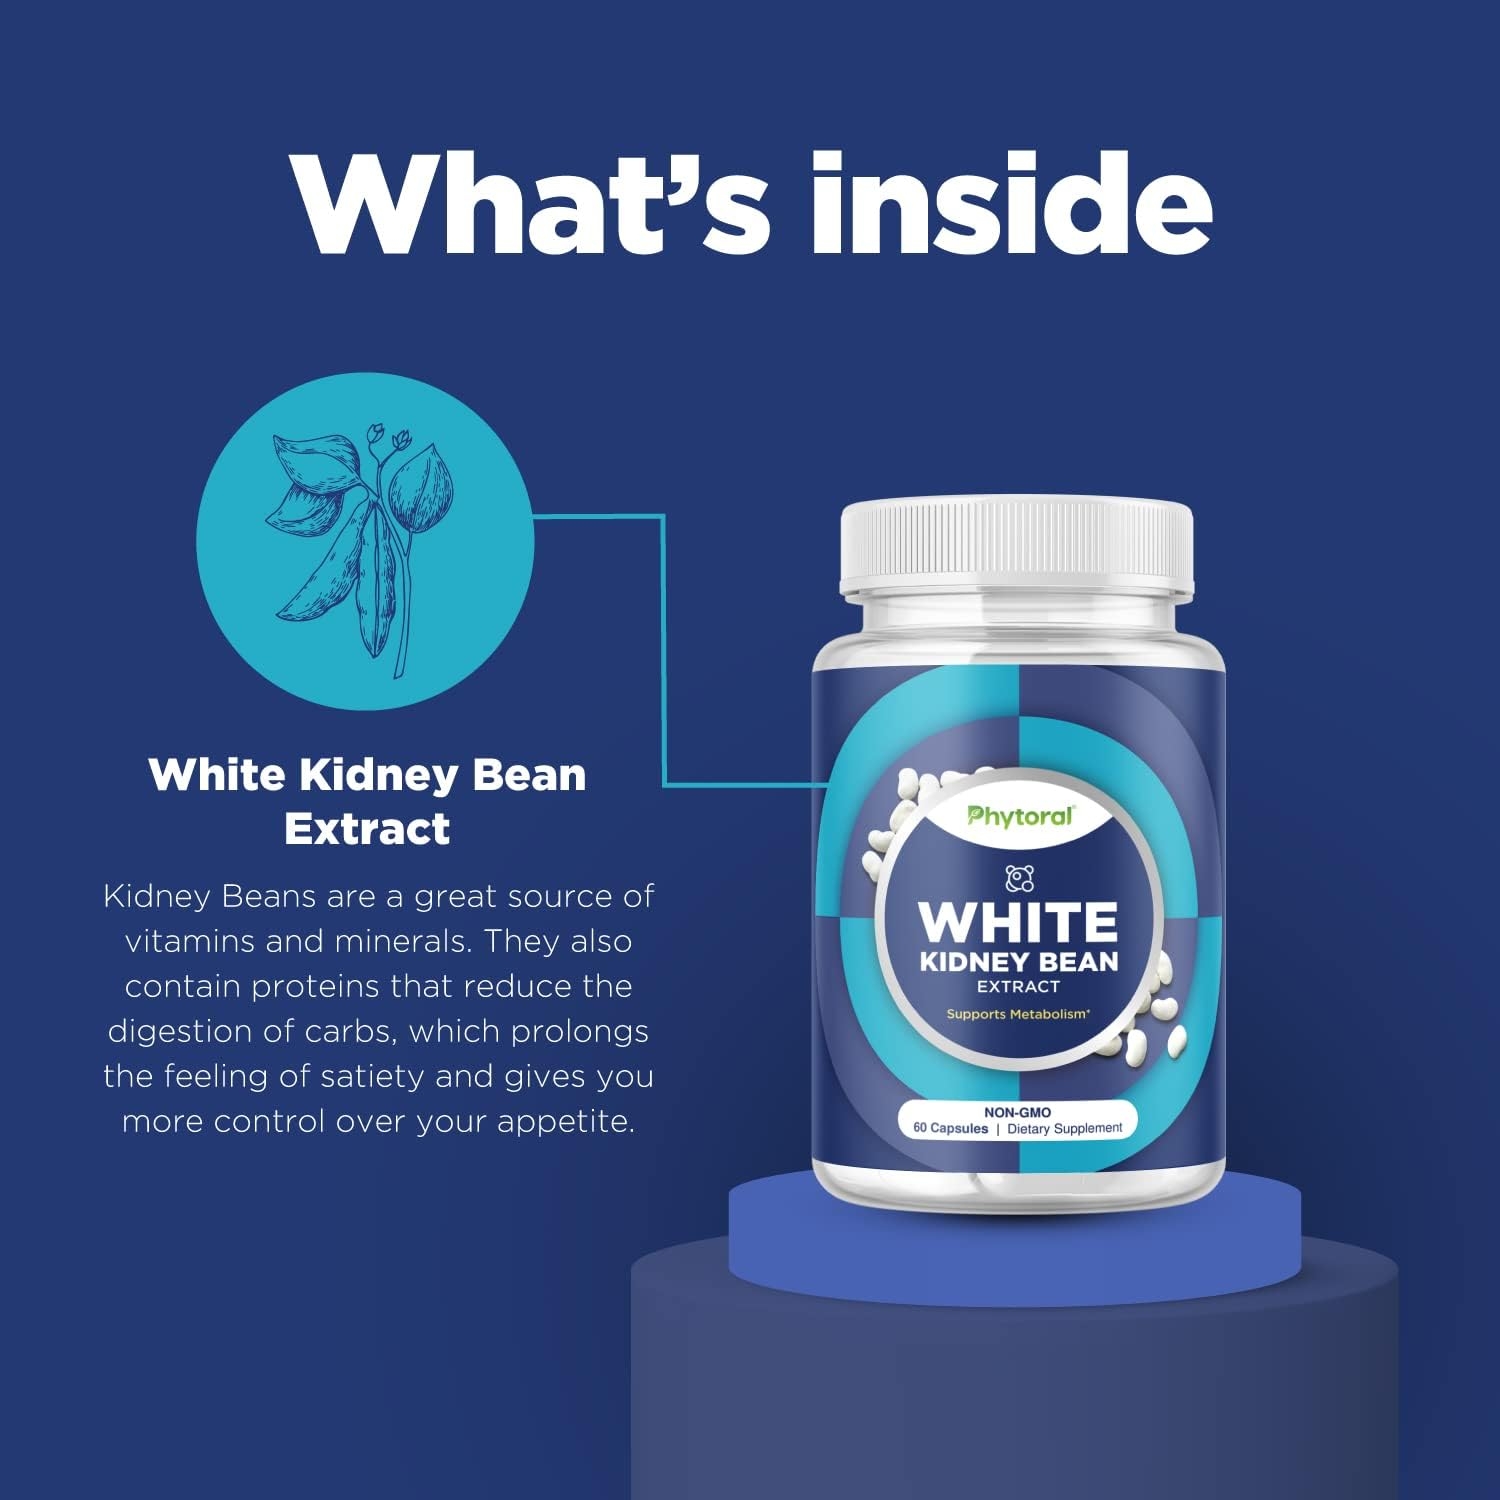 White Kidney Bean Energy Supplements - Pure White Kidney Bean Extract Pill with Amylase Enzyme and Natural Energy Pills for Fatigue - Potent and Natural Vegetarian Supplements for Women and Men